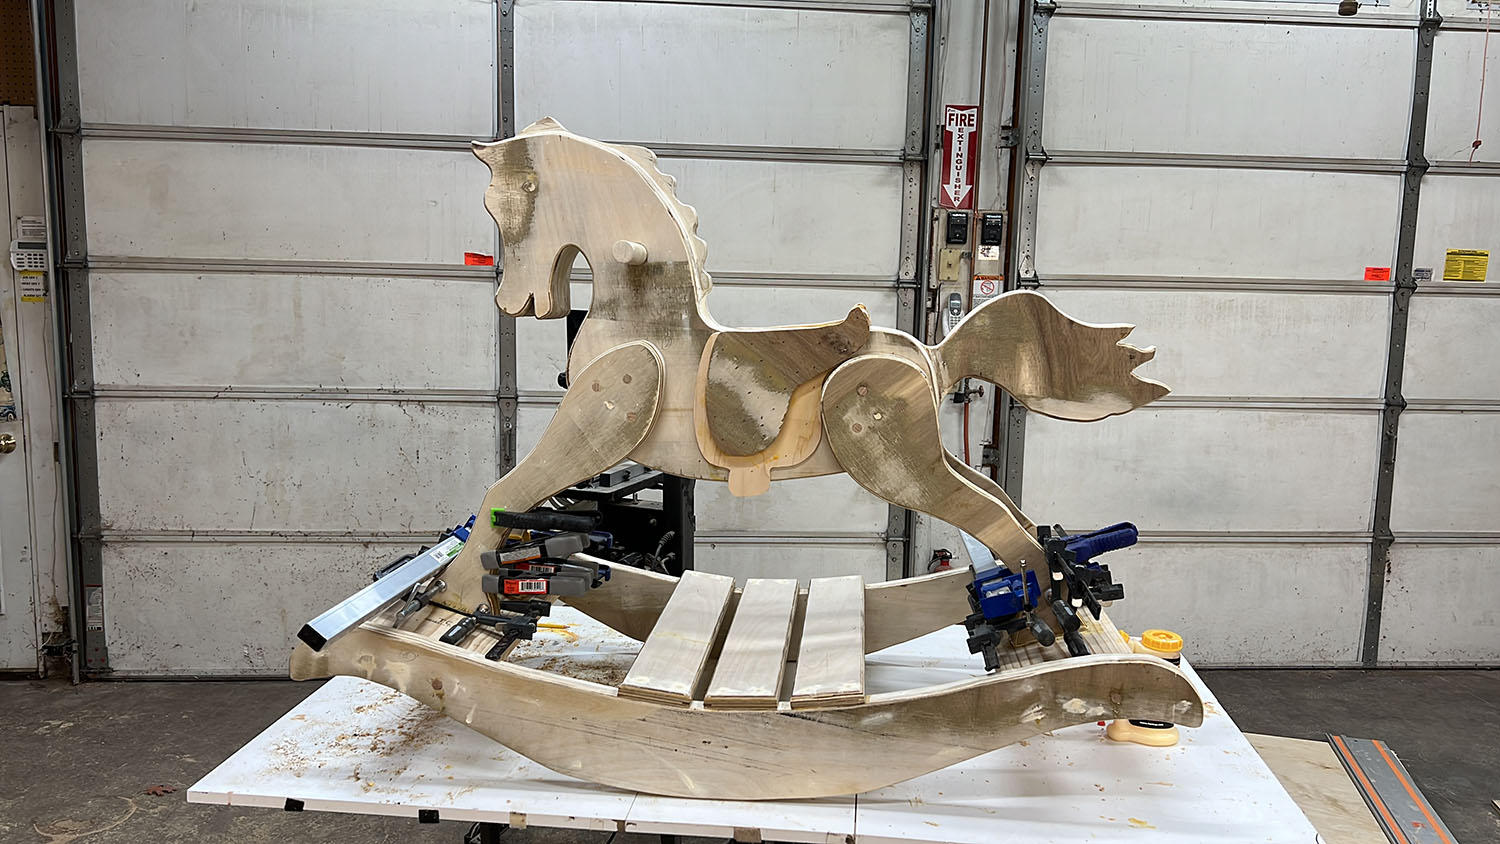 Assembled wooden horse on the base